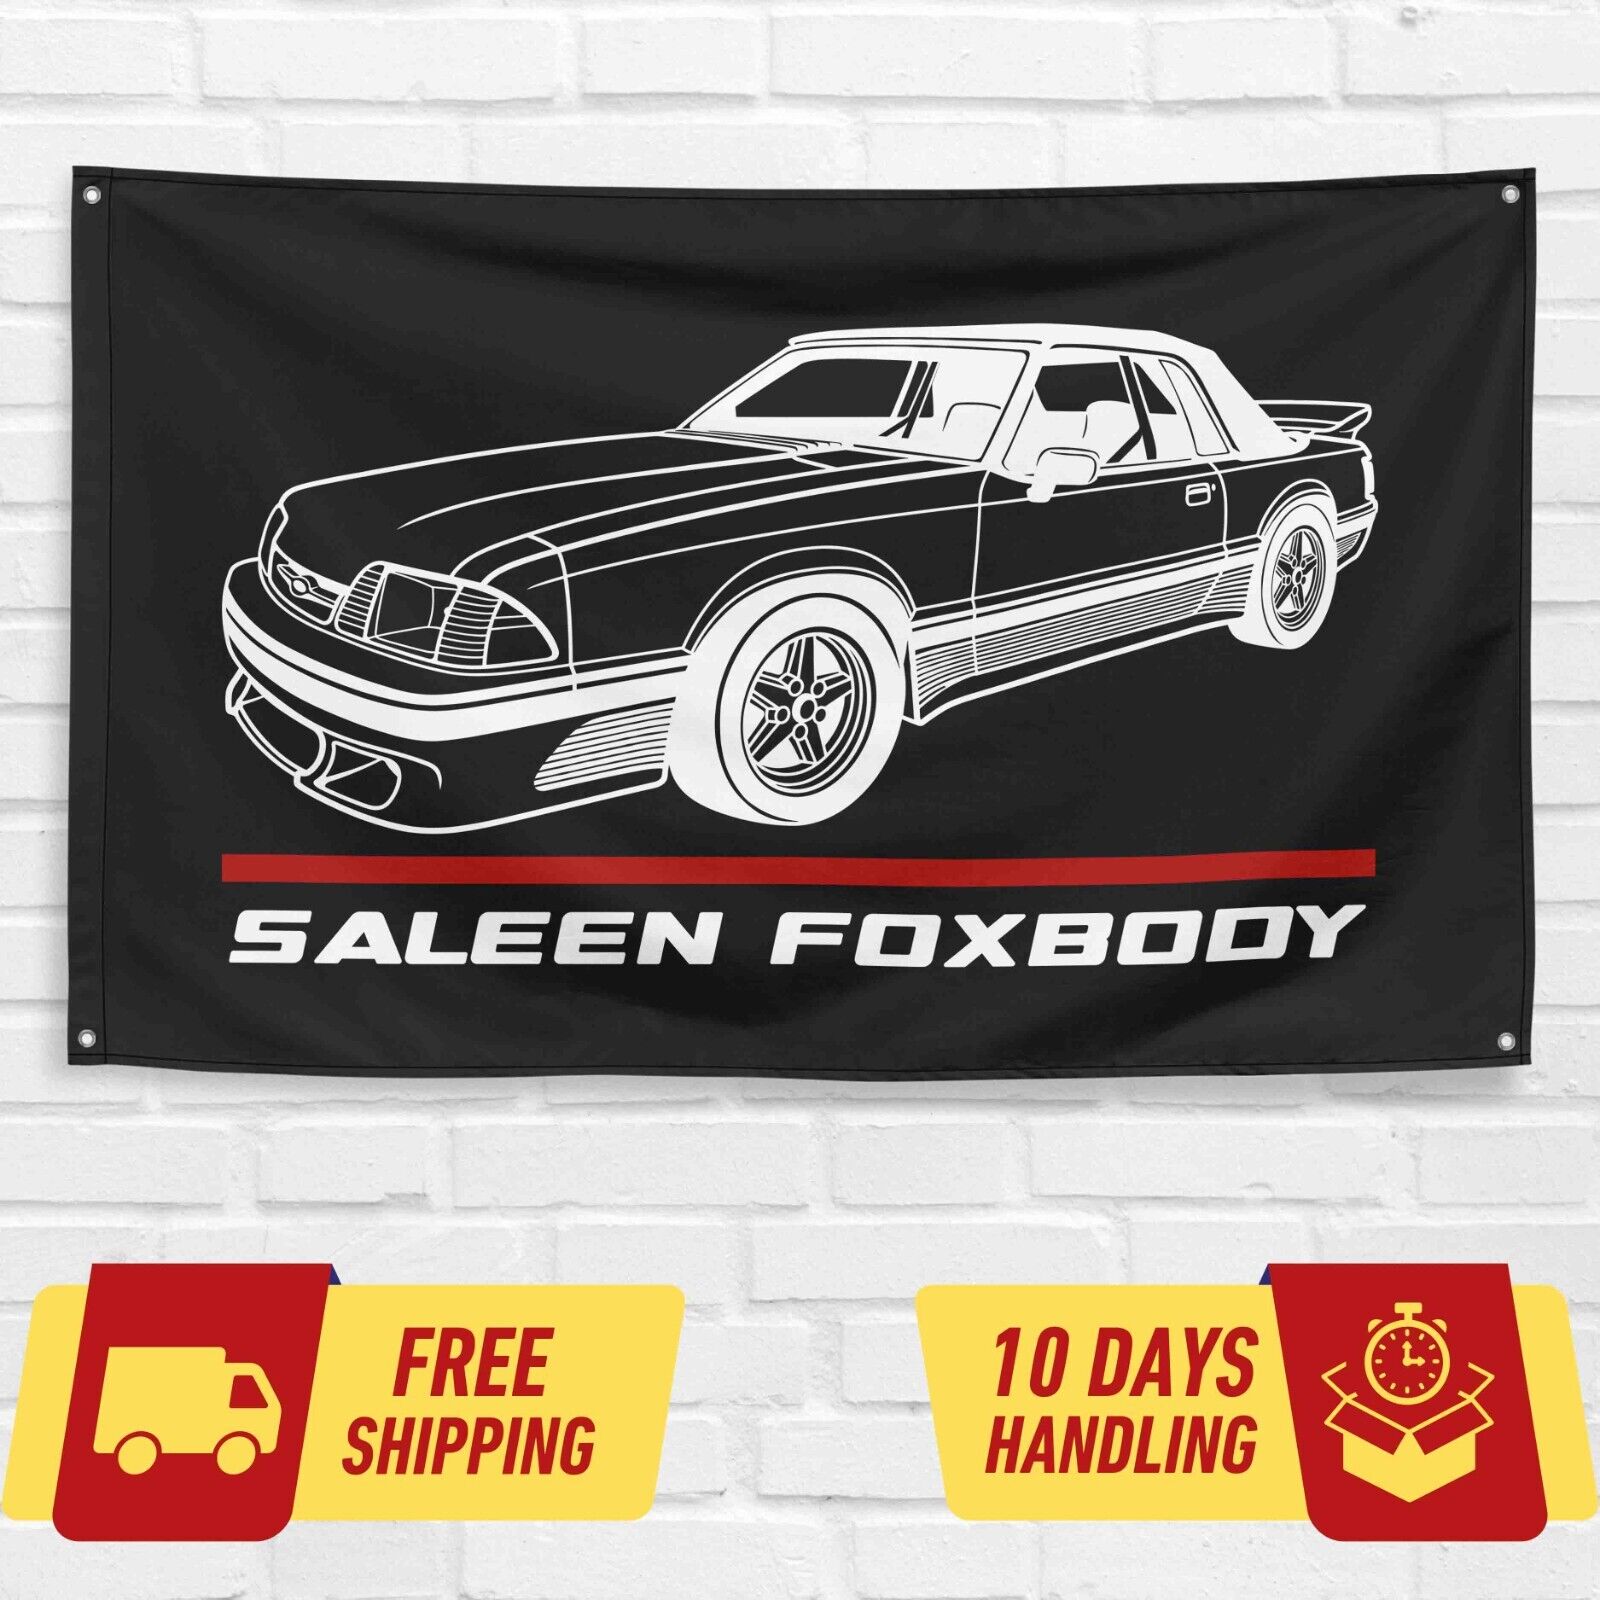 For Ford Mustang Saleen Foxbody 1992 Car Enthusiast 3x5 ft Flag Gift Banner